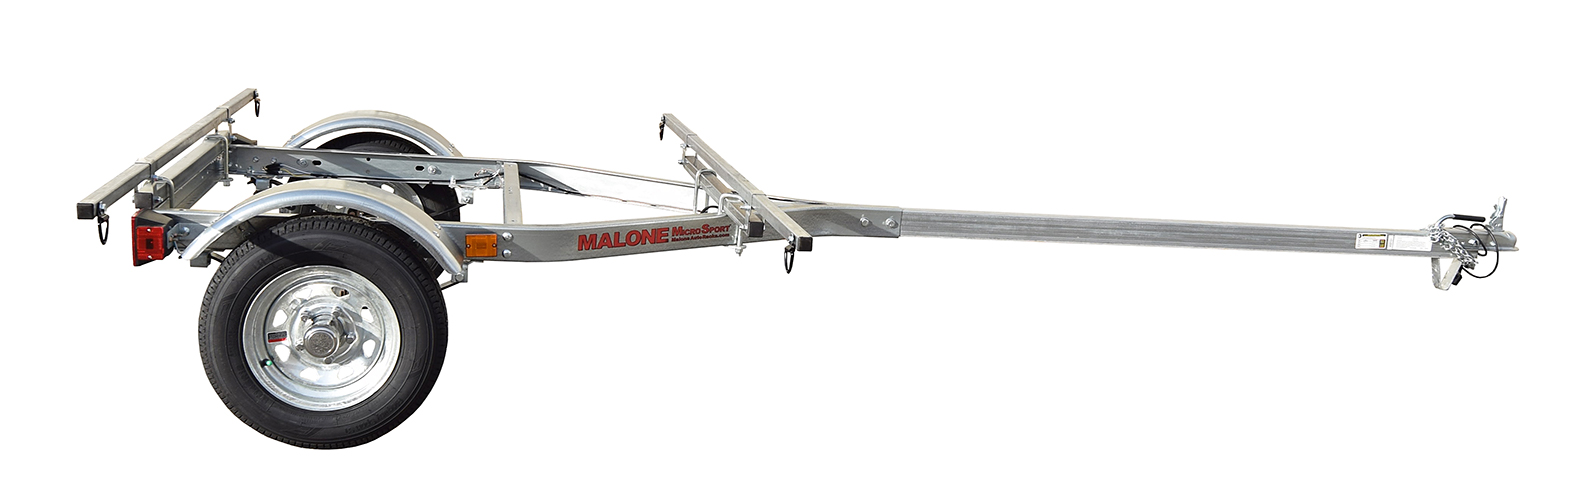 Transport, Storage & Launching: MicroSport™ LowBed™ Trailer by Malone Auto Racks - Image 4731